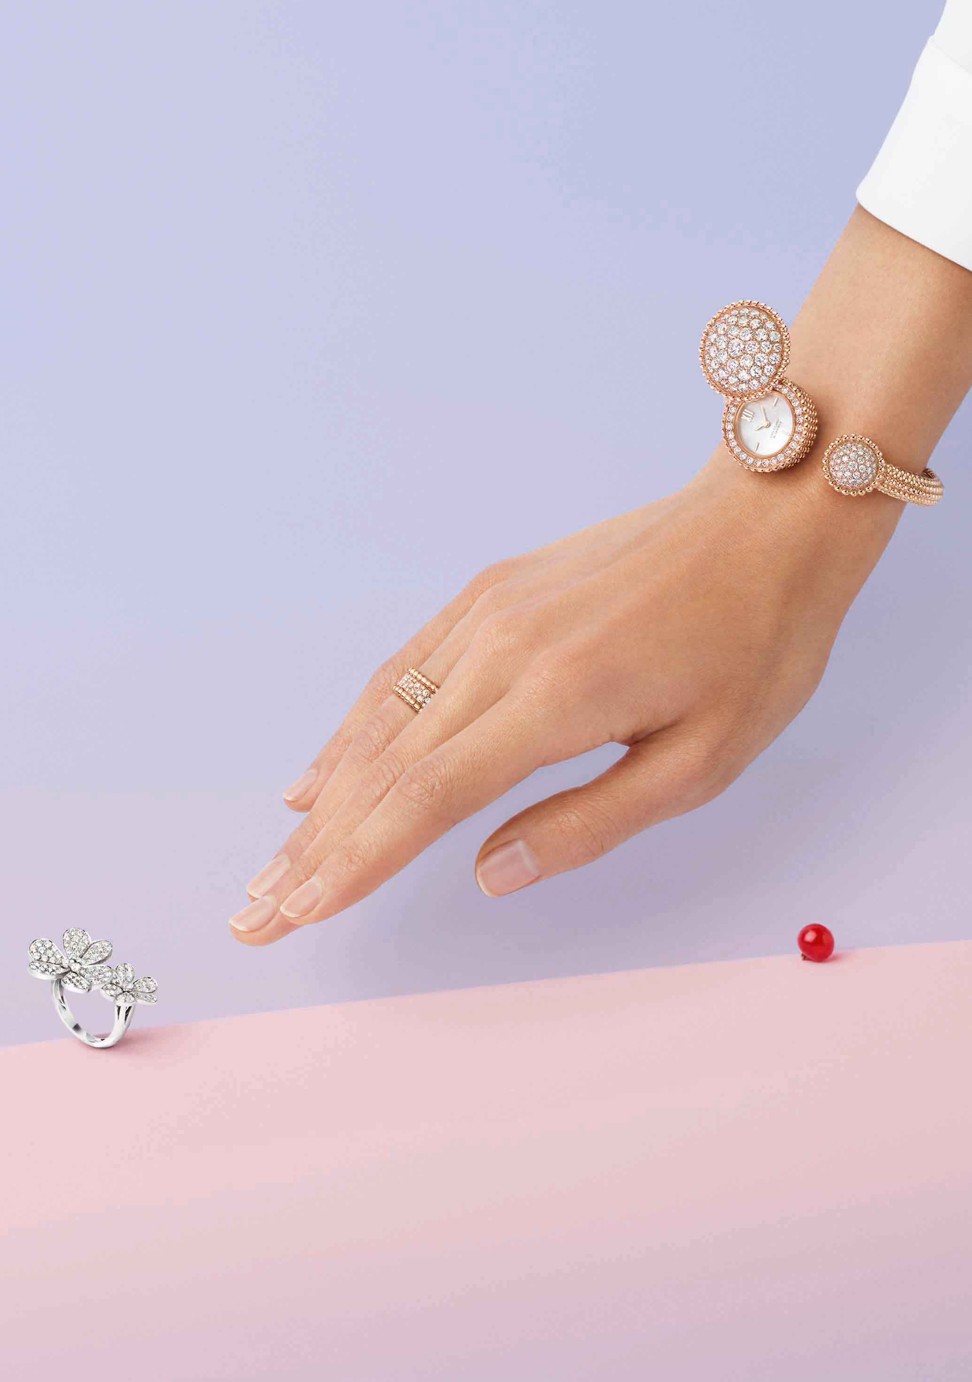 Perlée rose gold watch with white mother-of-pearl, diamonds; Perlée diamond ring with three rows of rose gold and diamonds; and a Frivole Between the Finger Ring with white gold and diamonds from the Diamond Breeze Collection. Photo: Van Cleef & Arpels